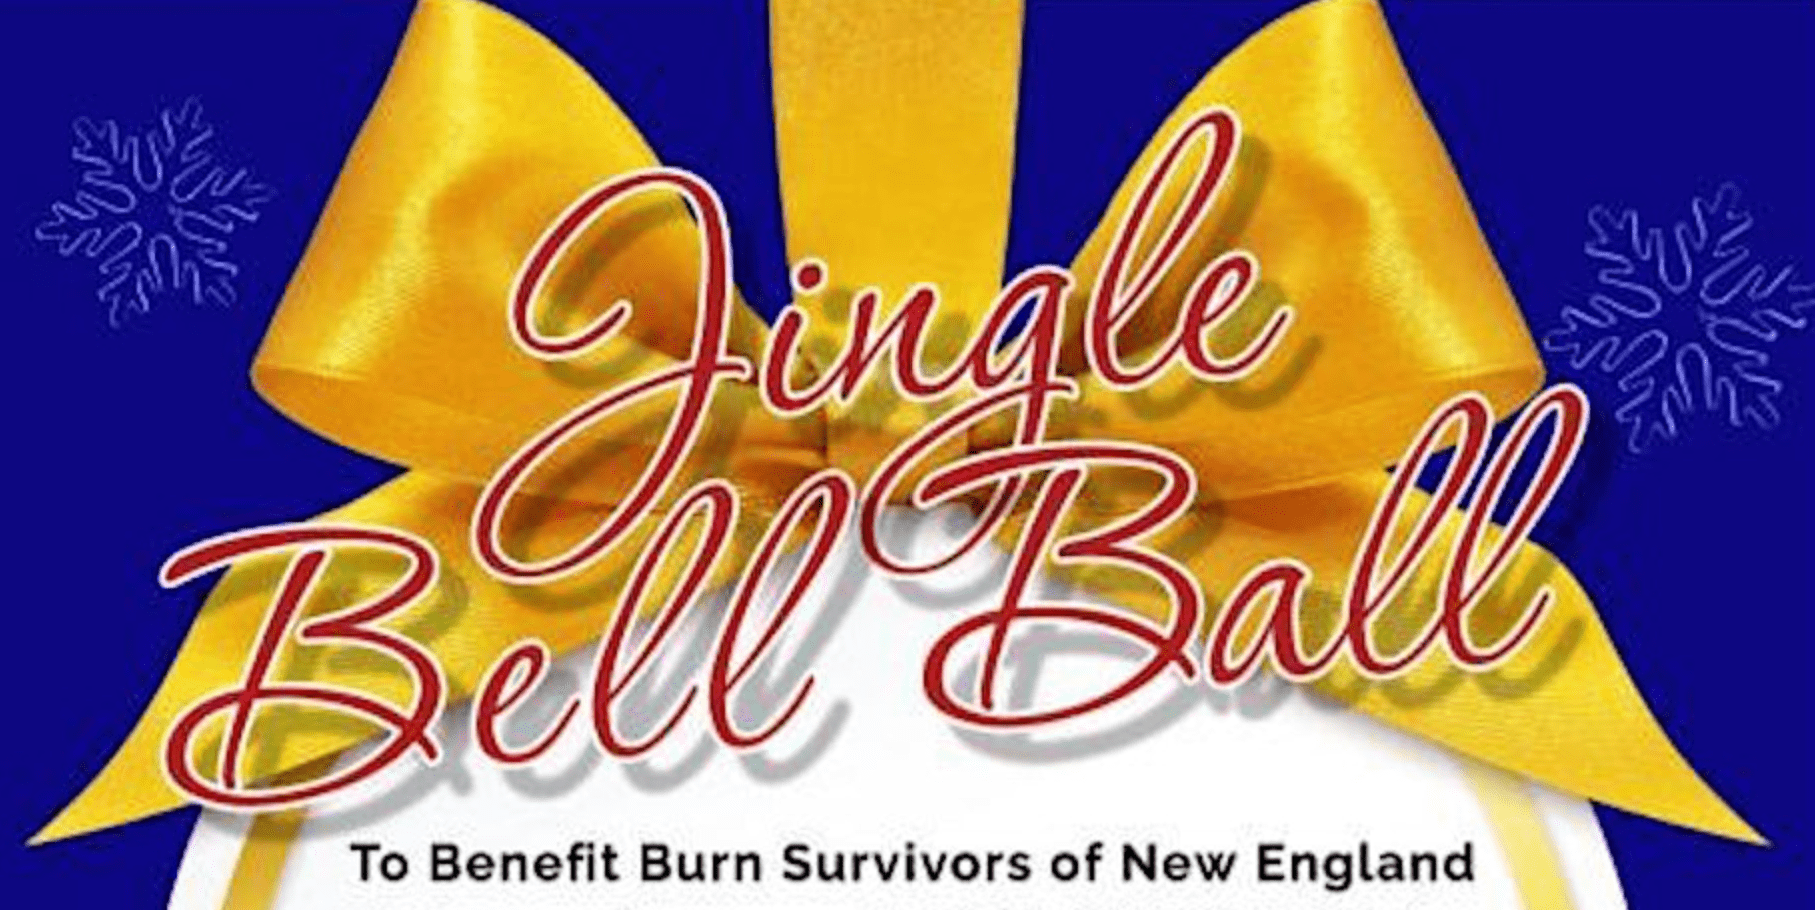 Jingle Bell Ball to Benefit Burn Survivors of New England